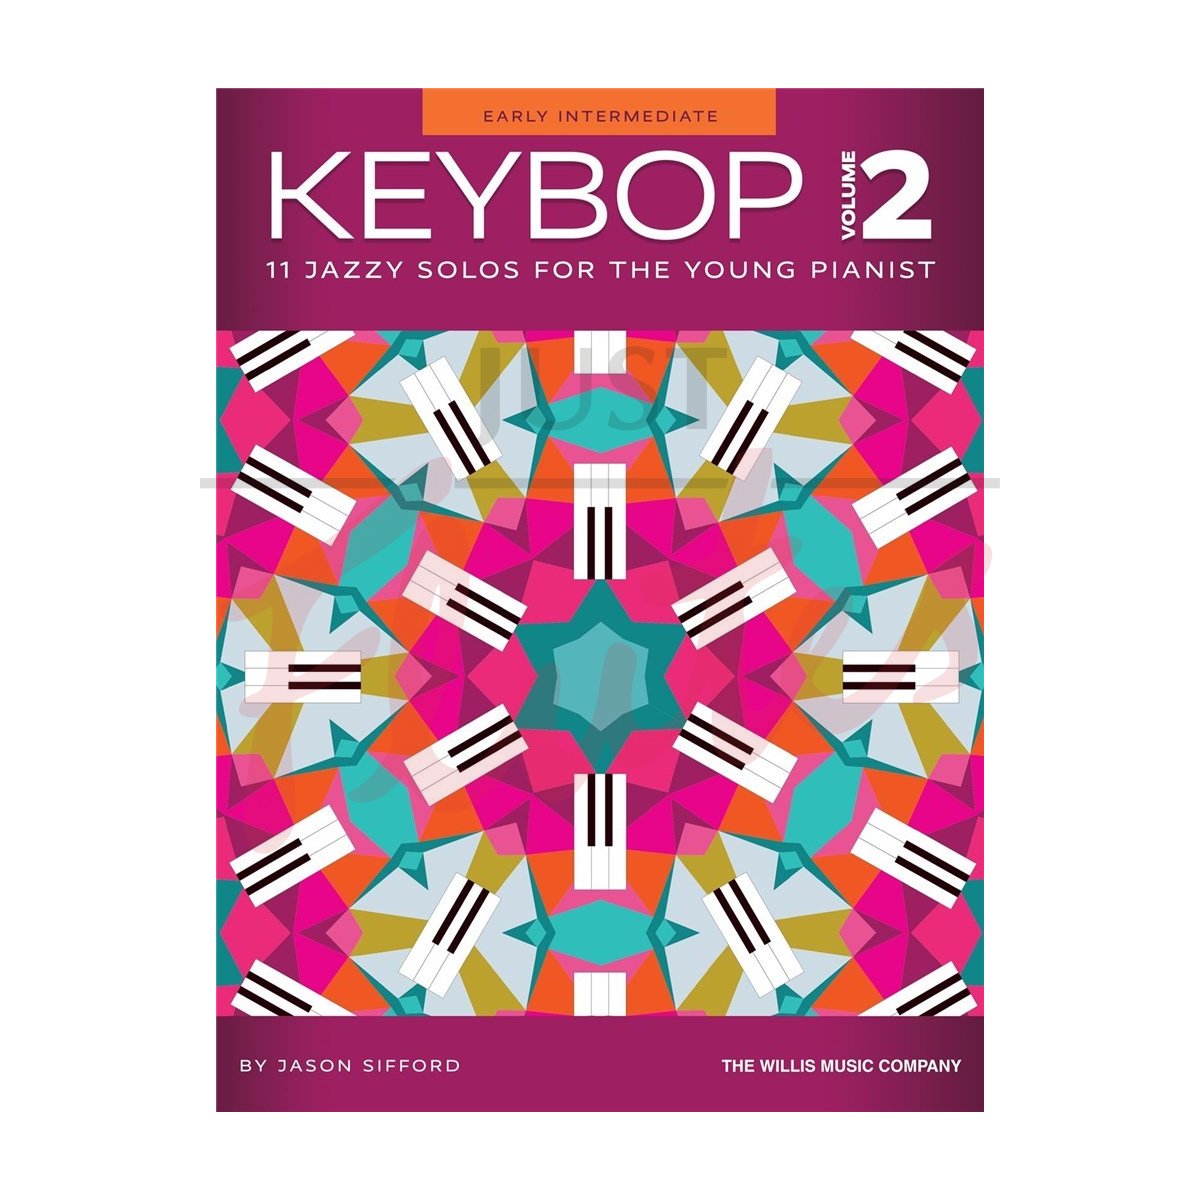 Keybop Volume 2: 11 Jazzy Solos for the Young Pianist